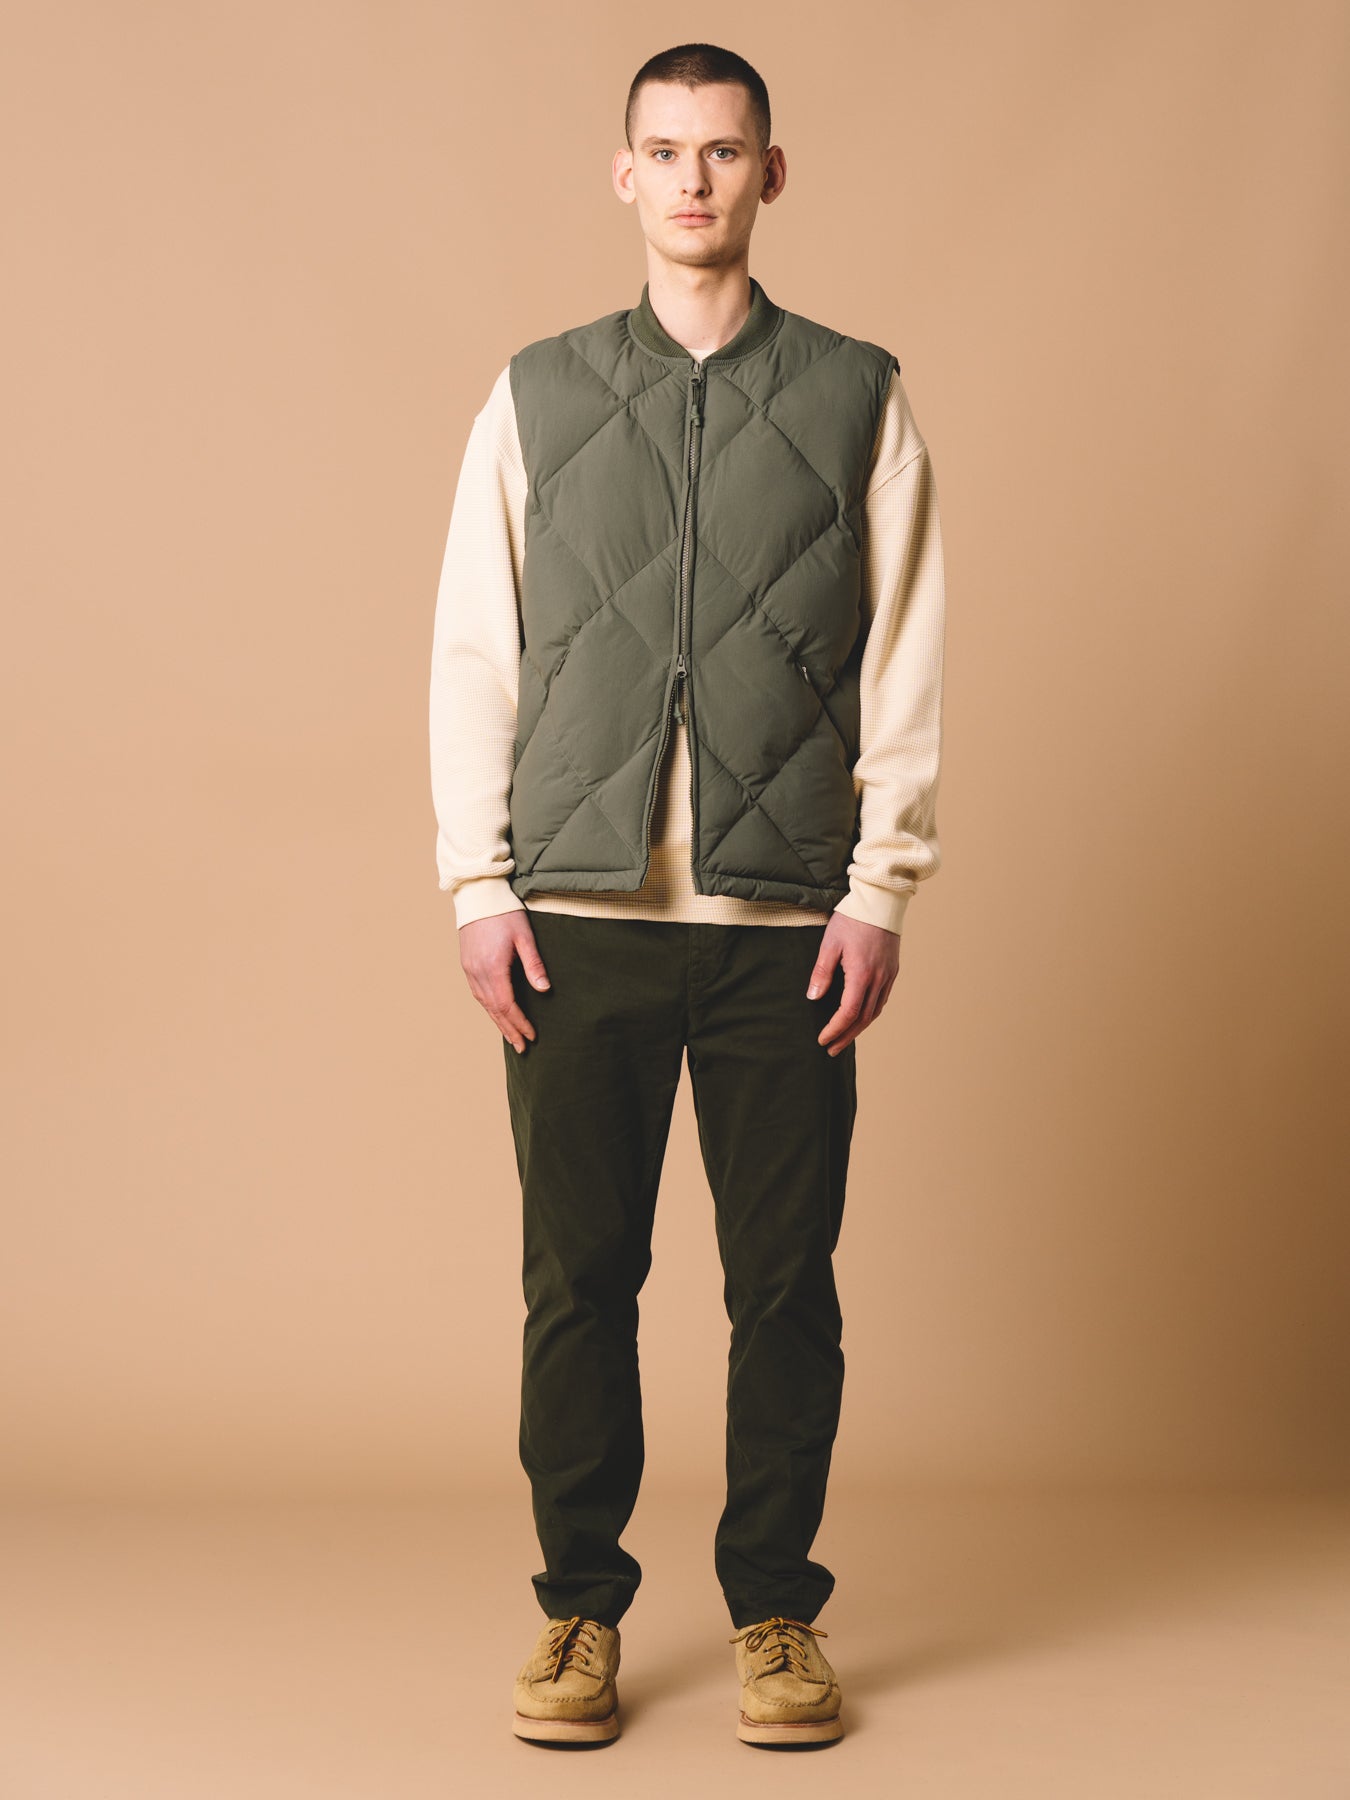 A model wearing the KESTIN Linton Vest, which is made from a recycled synthetic insulation.